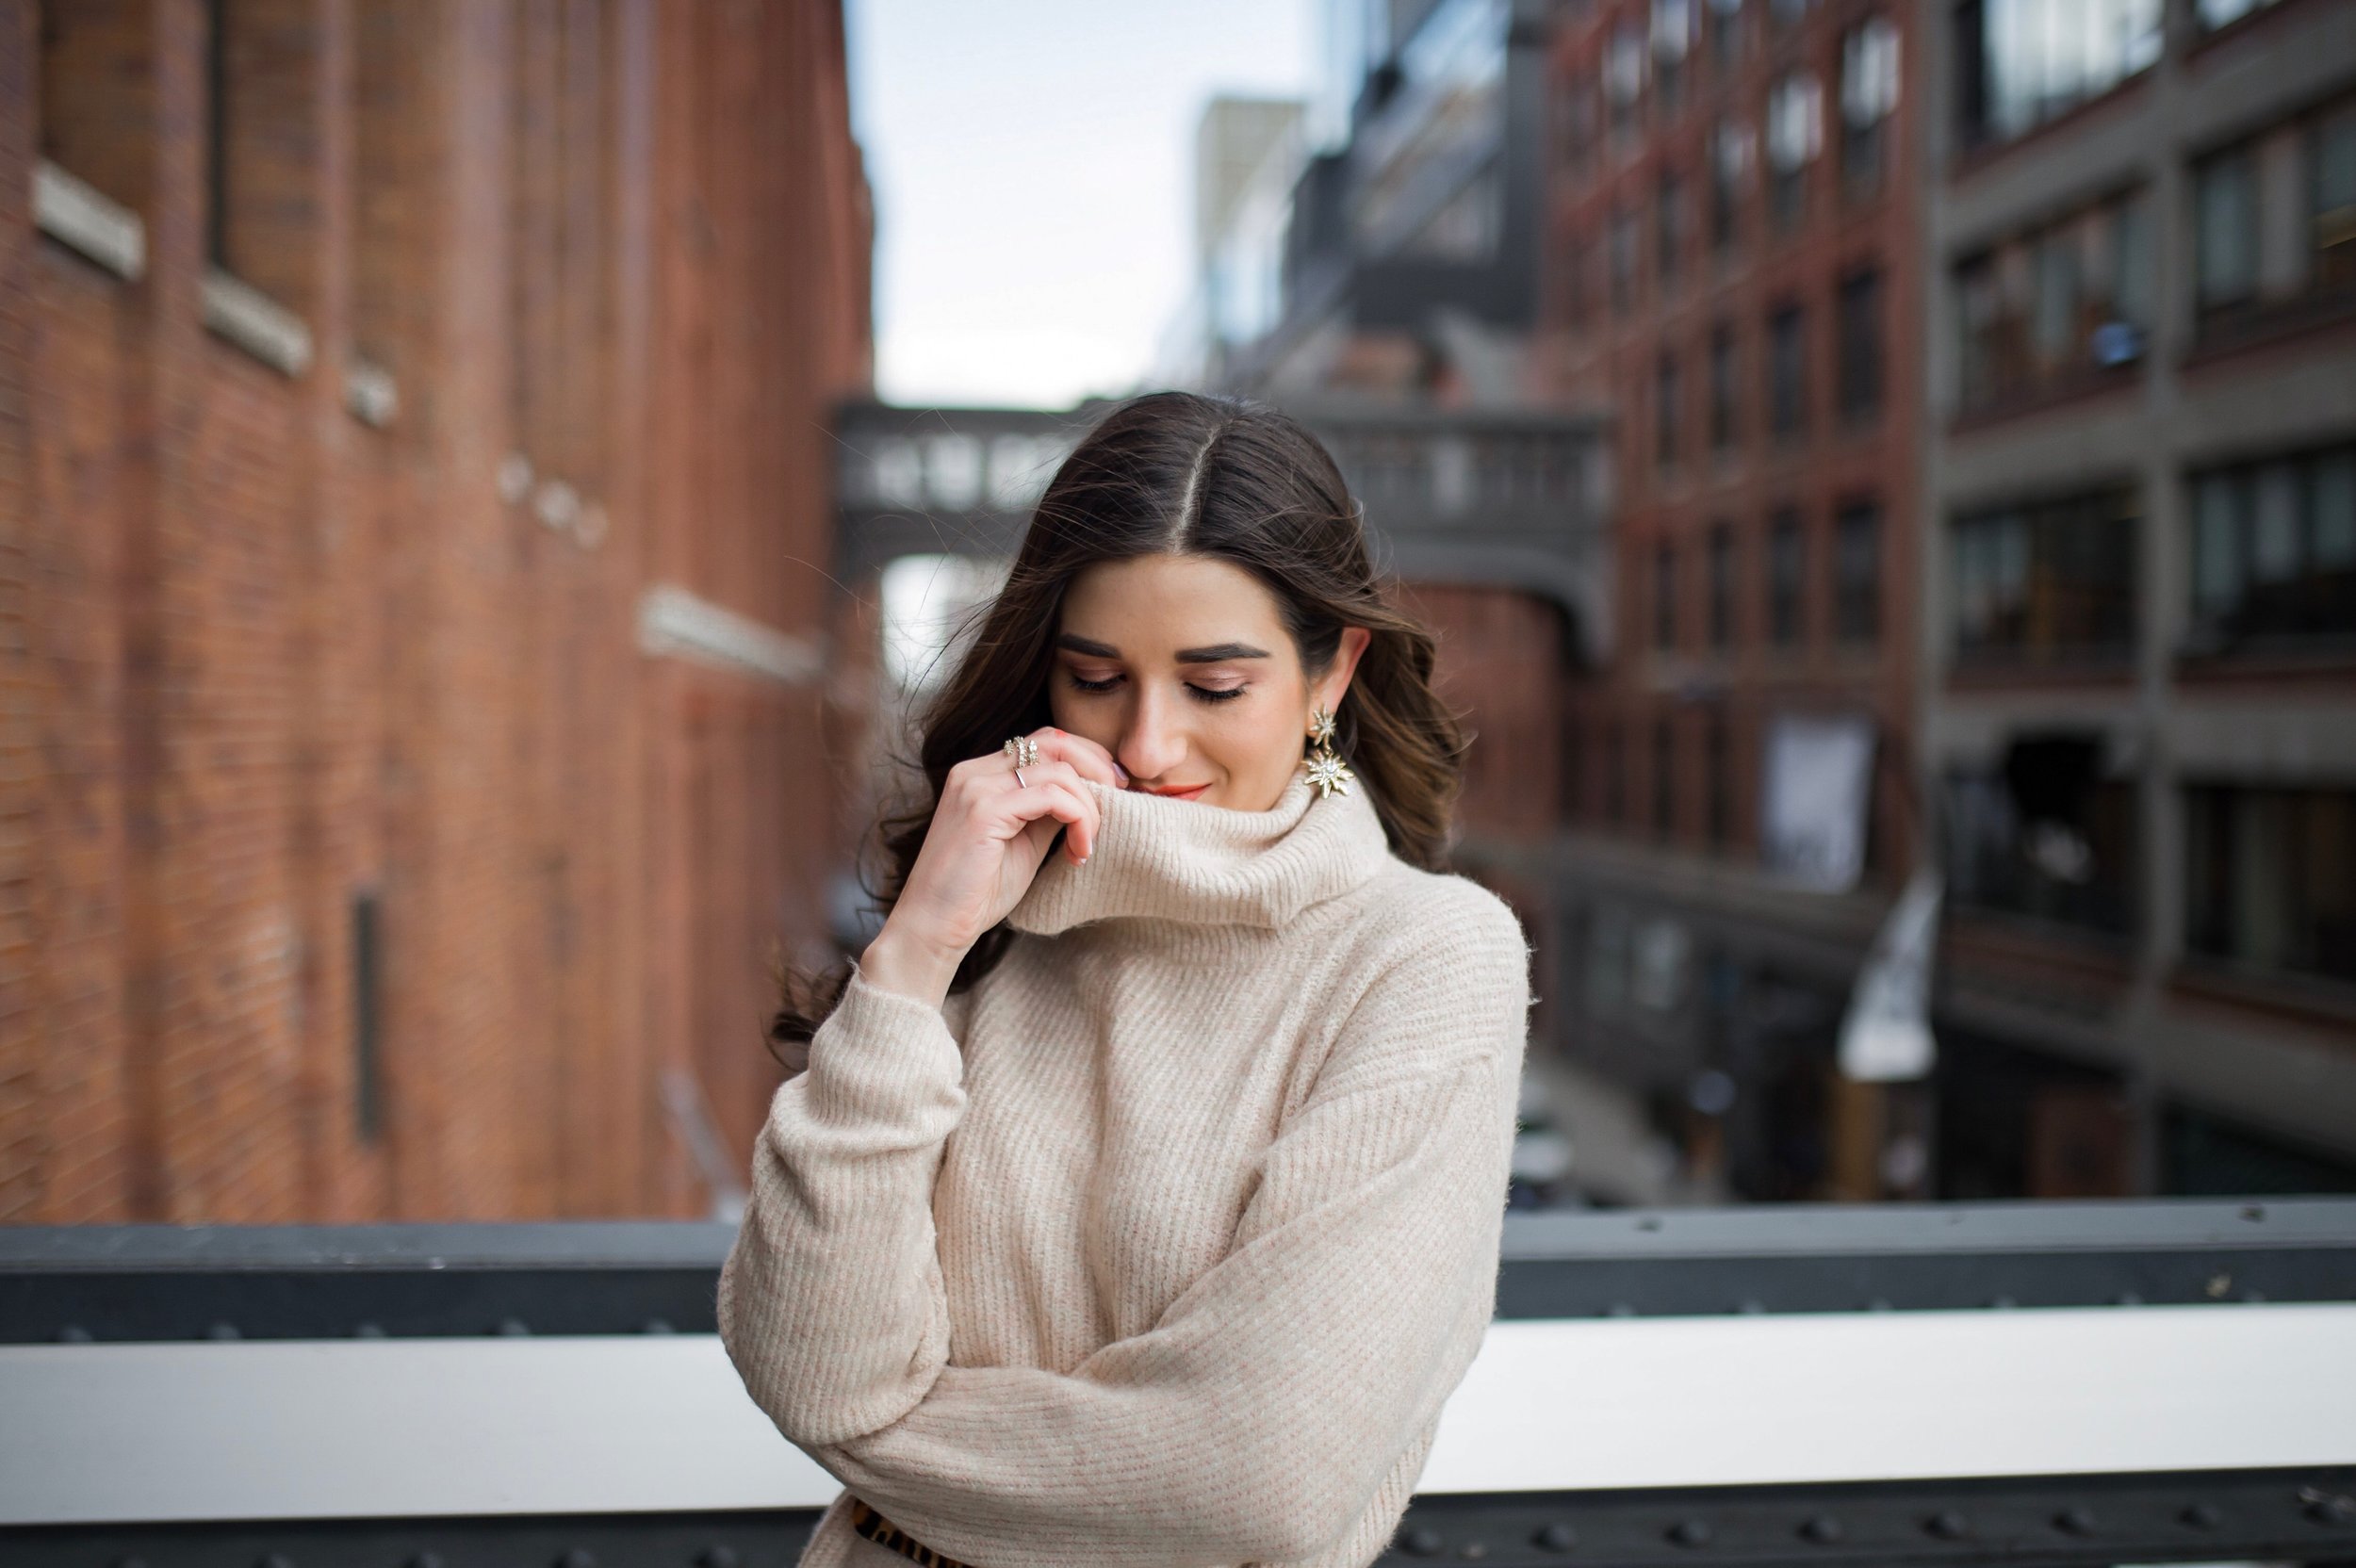 Why Blogging Is Far From Freeloading Beige Sweater Dress White Booties Esther Santer Fashion Blog NYC Street Style Blogger Outfit OOTD Trendy Shopping Leopard Belt Neutral Winter How To Wear Shop Sale Mango Jcrew The High Line Photoshoot Inspiration.jpg